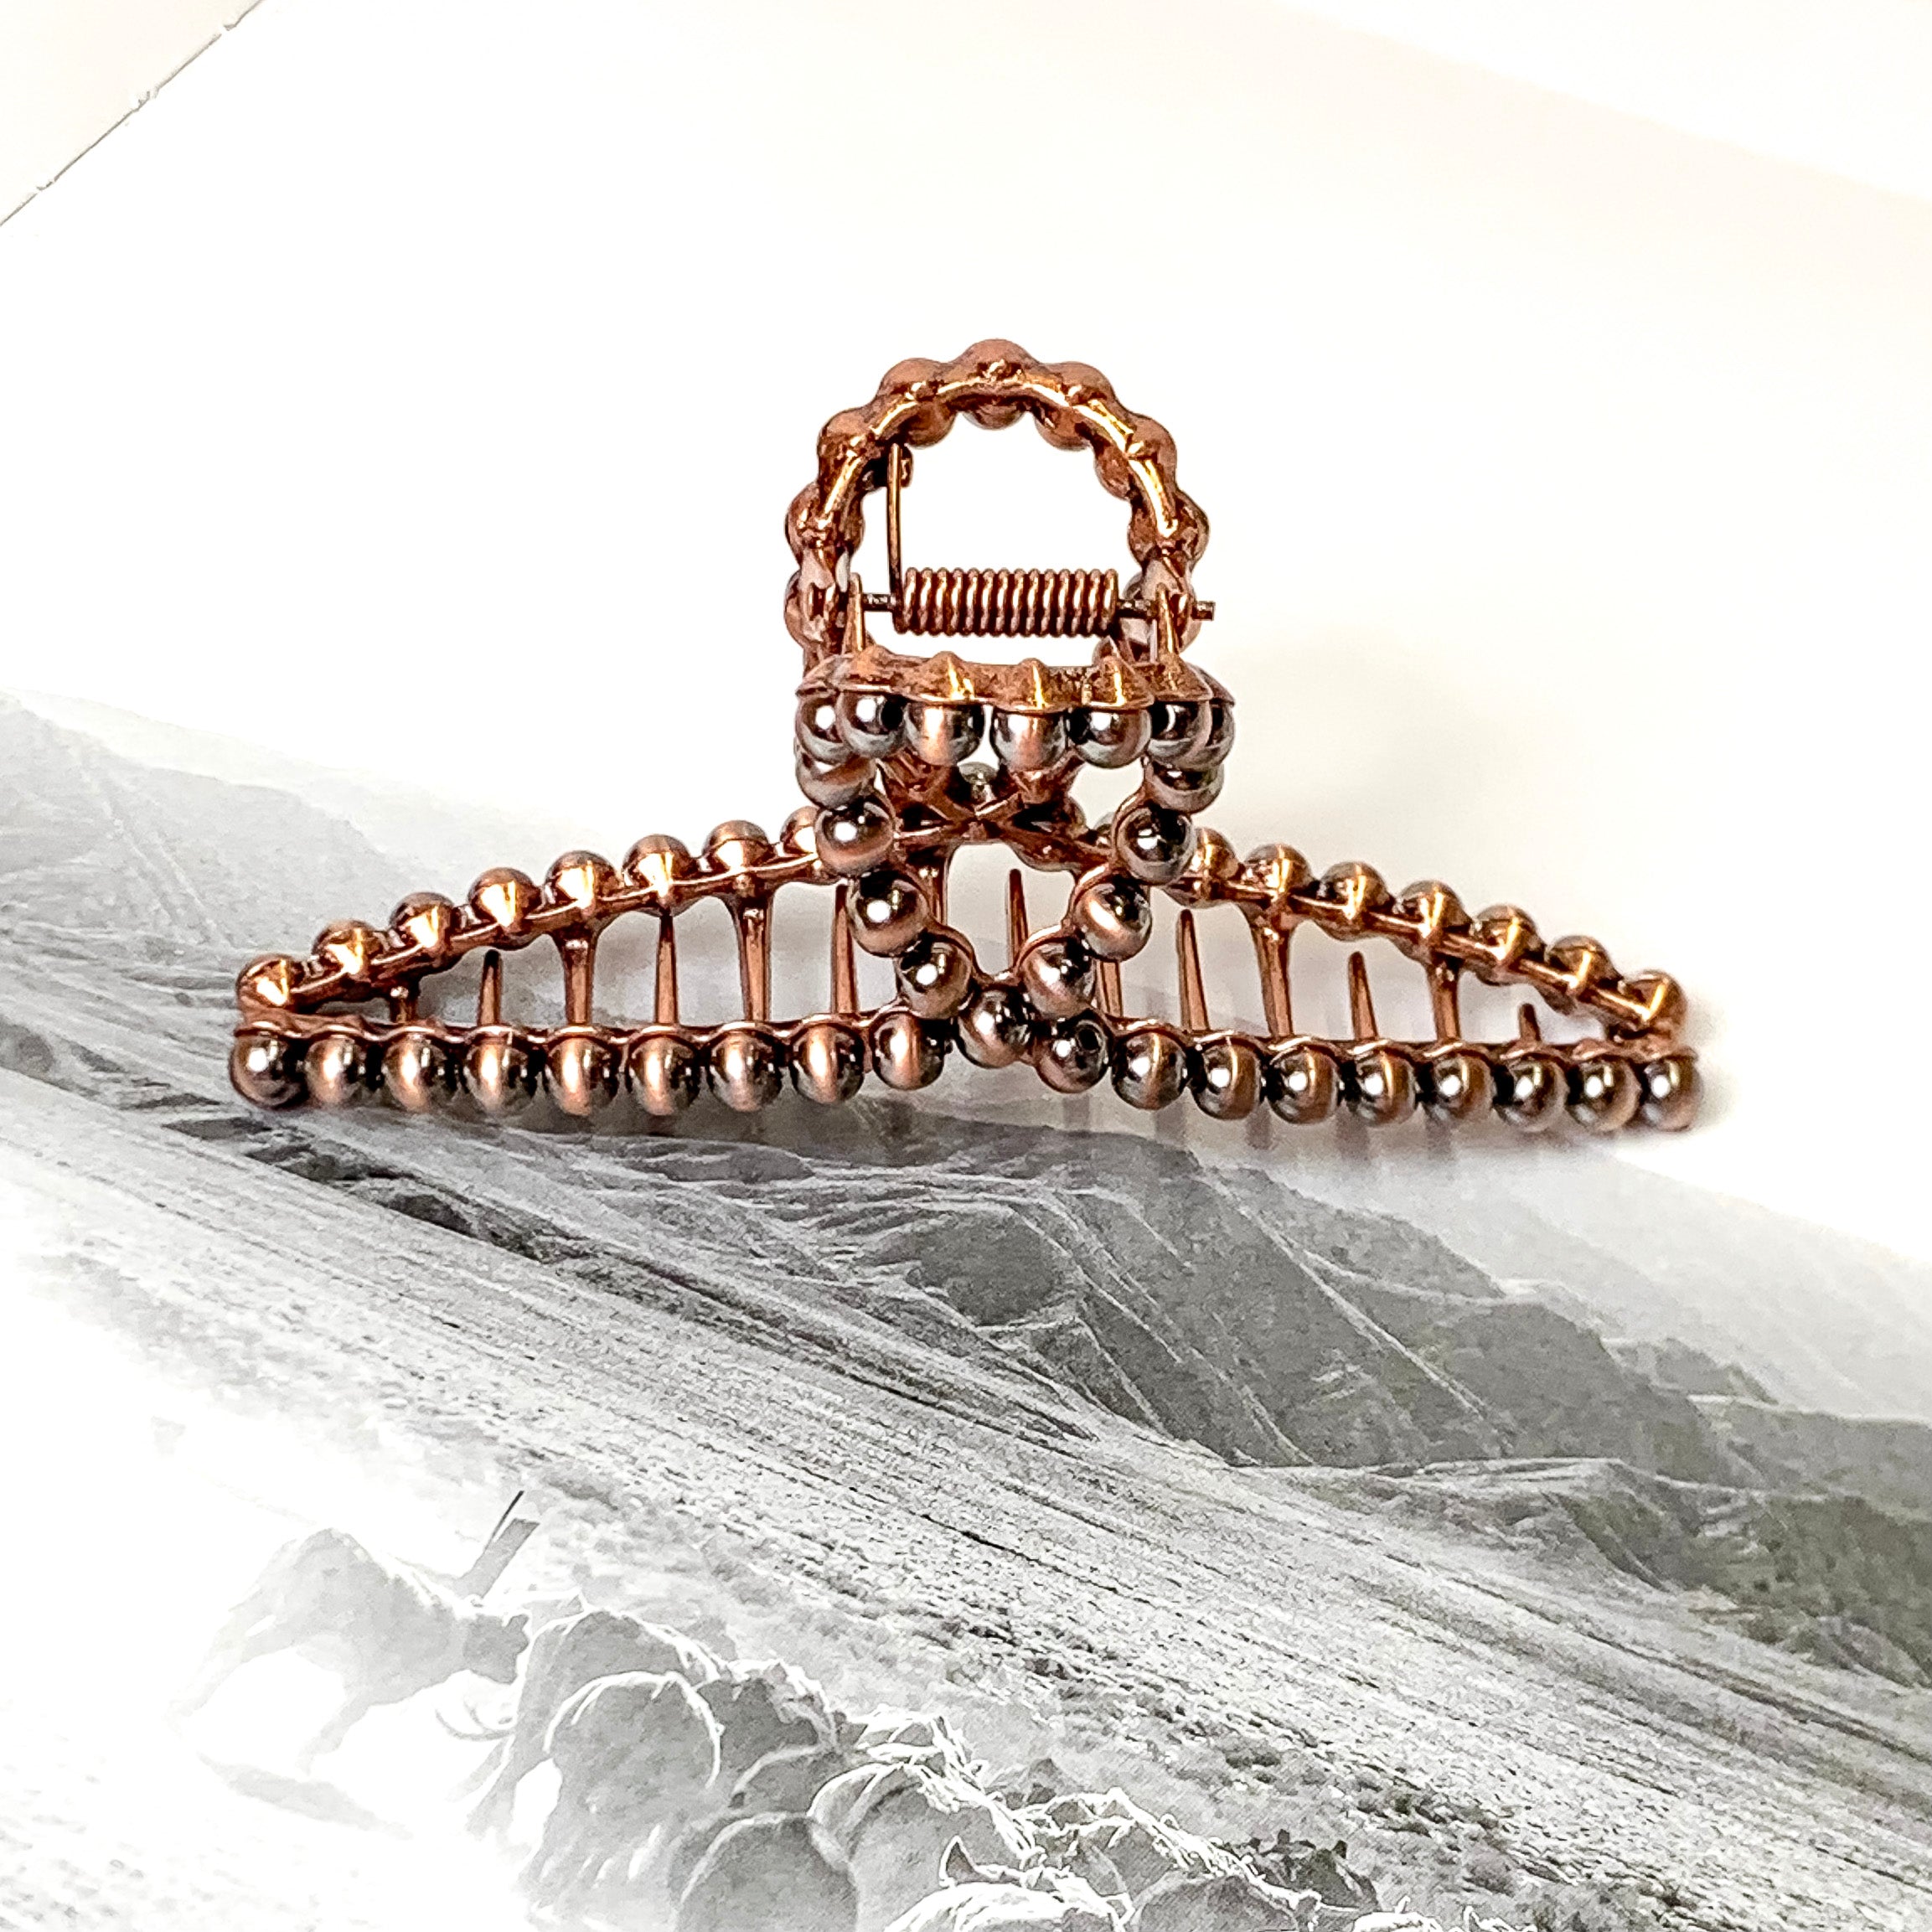 Navajo Pearl Embellished Loop Banana Hair Clip in Copper Tone - Giddy Up Glamour Boutique